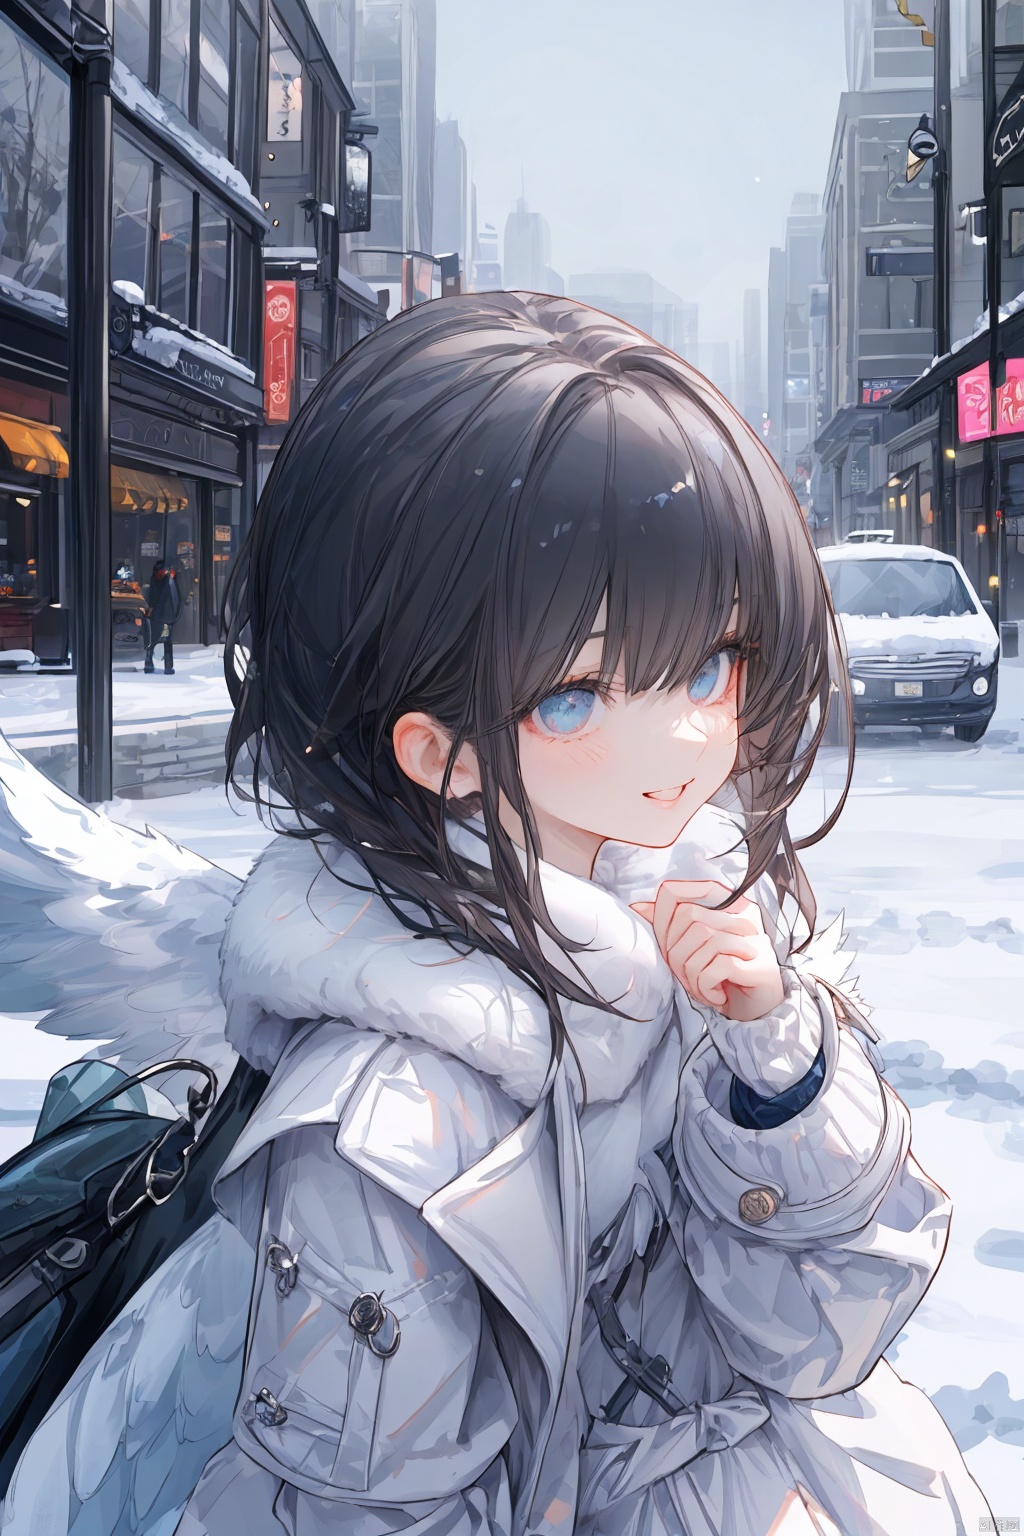  angel，Snowy city center.
BREAK
A black-haired woman sits alone, wearing a blue coat with a white, fluffy collar. She smiles warmly, looking up at the sky. Her eyes are blue, reflecting the sky. She seems nostalgic or hopeful.
BREAK
Skyscrapers tower over the street, where cars and people come and go. She spends her time quietly, in contrast to the hustle and bustle of the city.
BREAK
The snow falls, creating a white carpet around her. The snow accumulates on her skin and clothes, but she doesn't mind. She likes this place, where she can listen to her heart and get closer to her dreams.
BREAK
She doesn't move yet. She still looks at the sky. She still looks beautiful.
